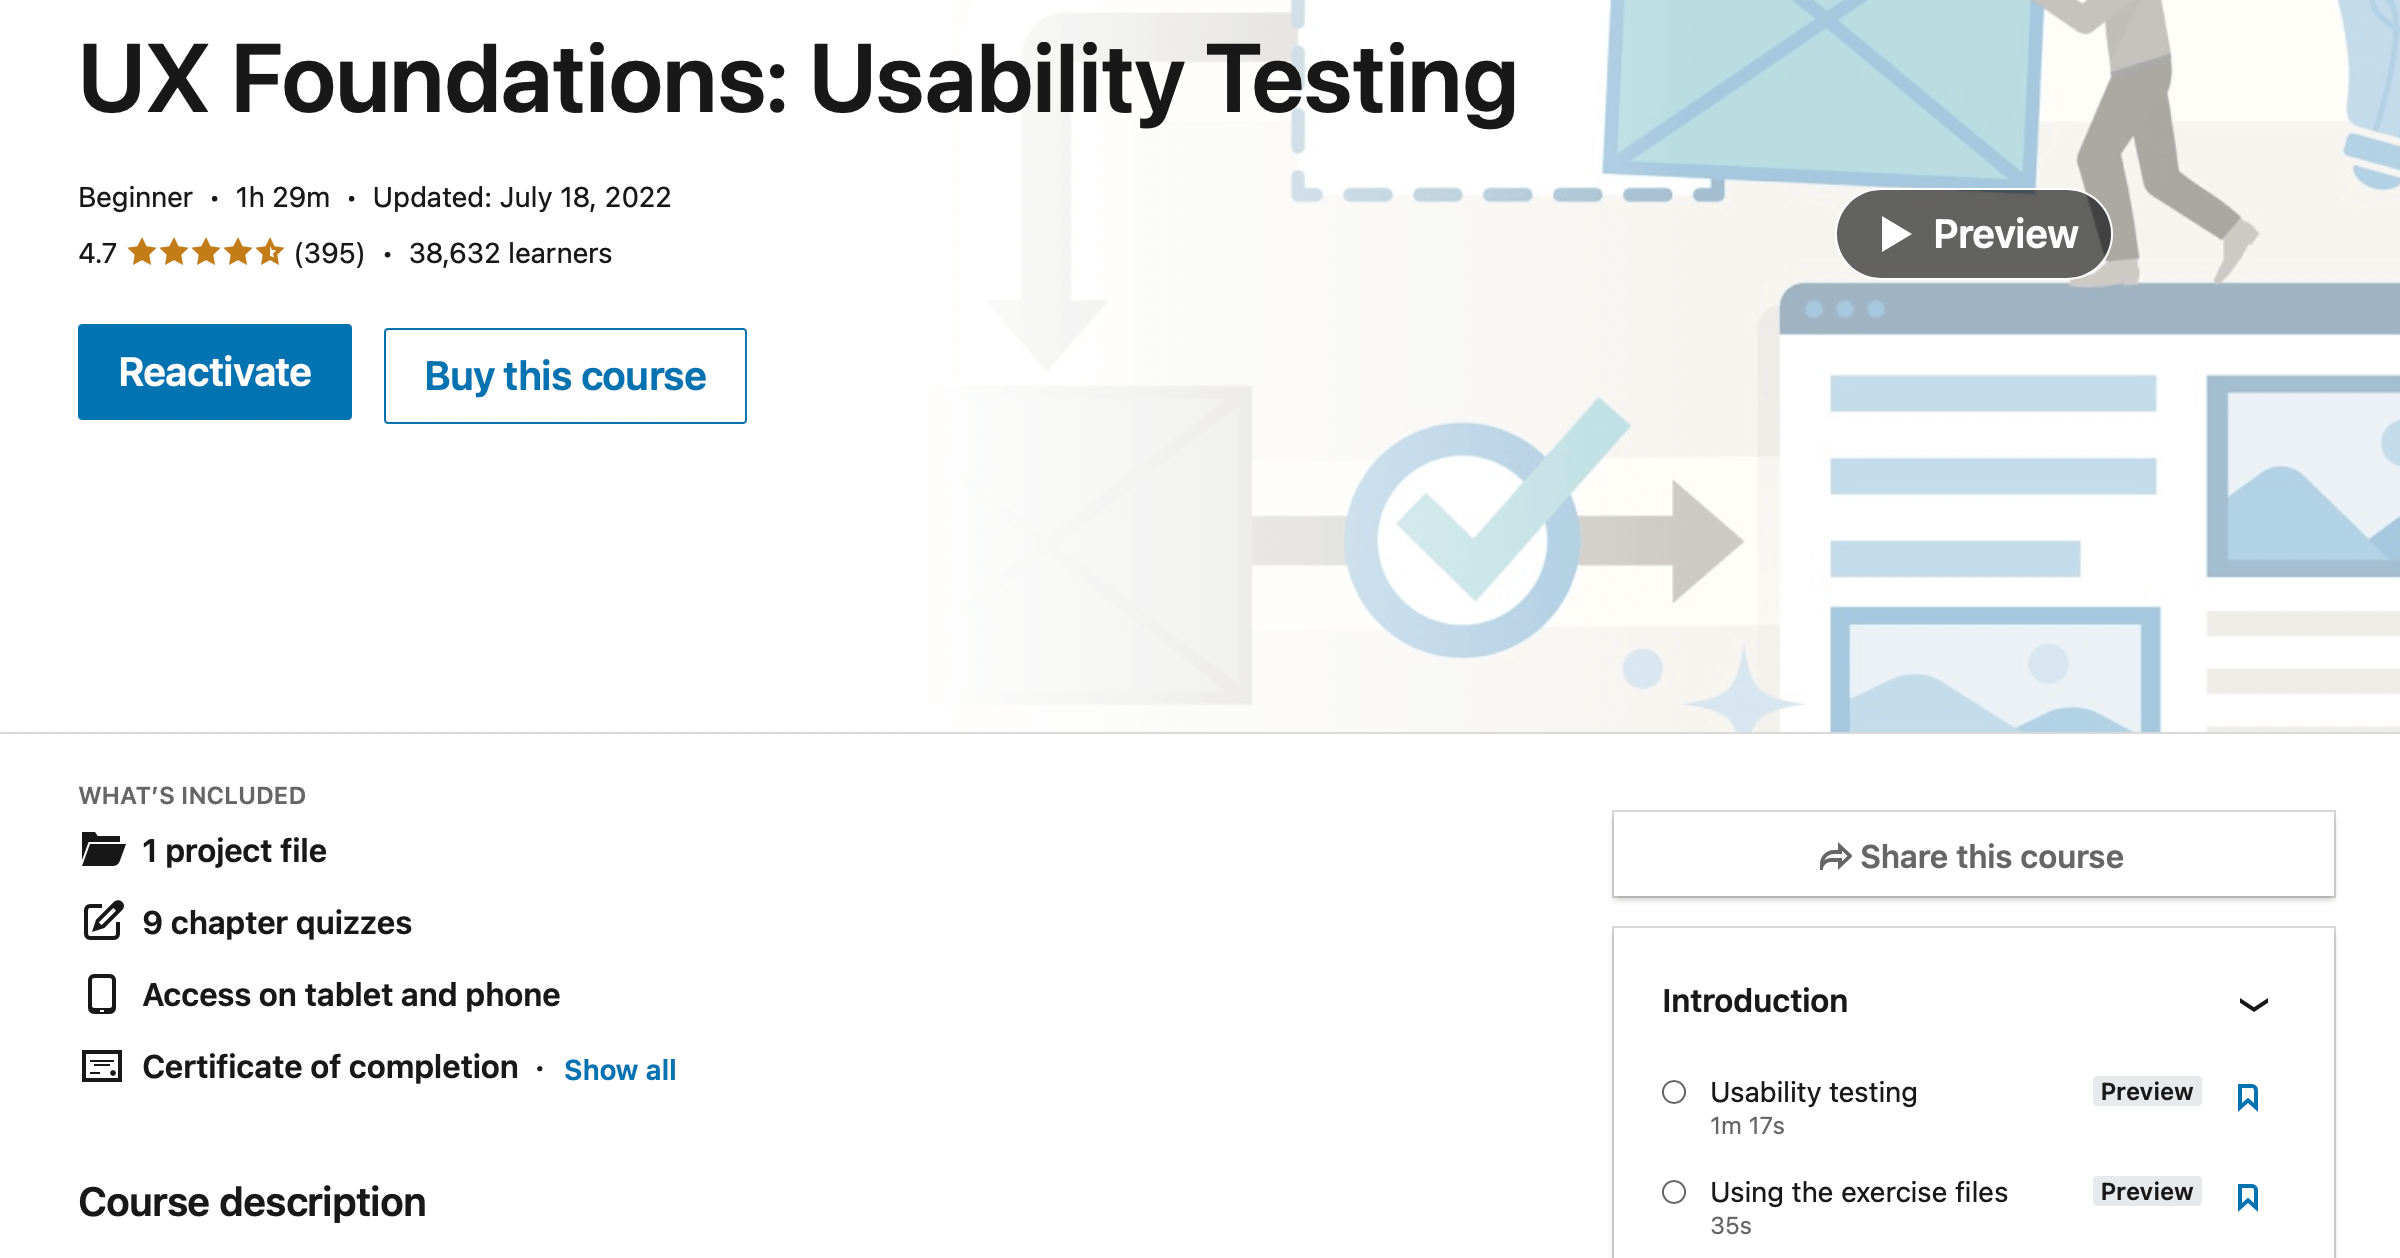 Best online usability testing course - UX Foundations Usability Testing